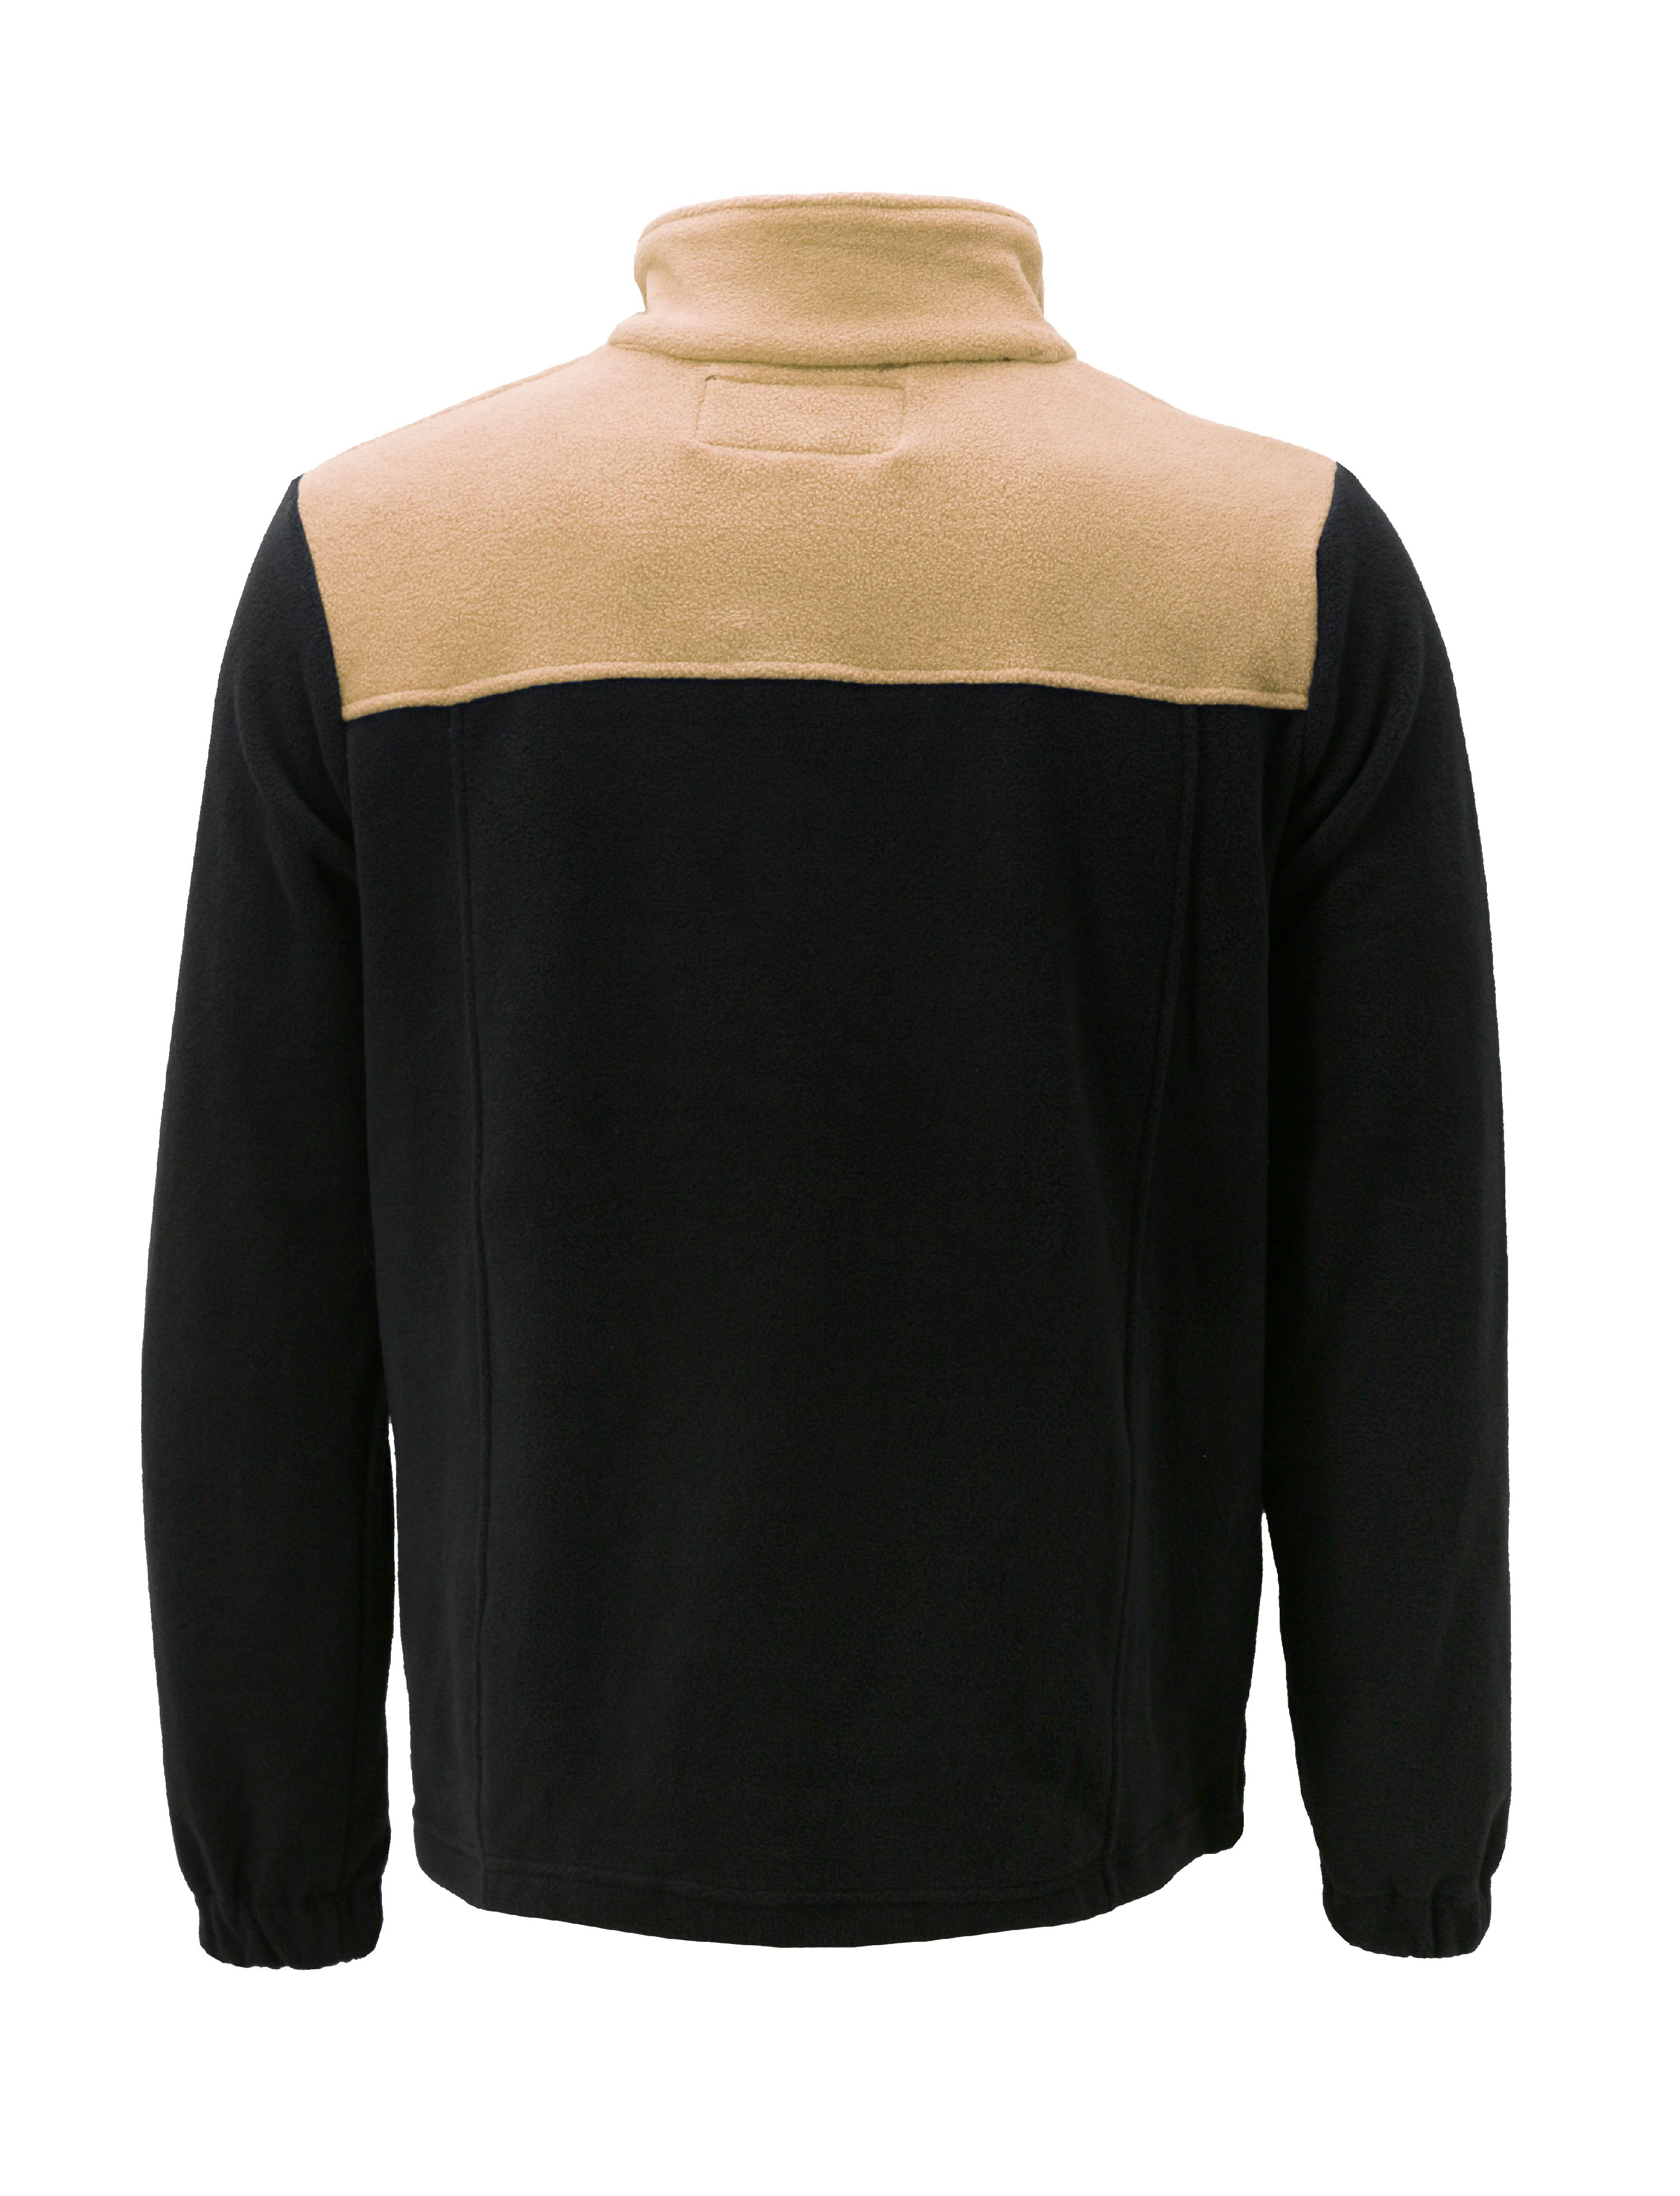 Men's Full Zip-Up Two Tone Solid Warm Polar Fleece Soft Collared Sweater Jacket (M, LF35 #3) - image 2 of 3